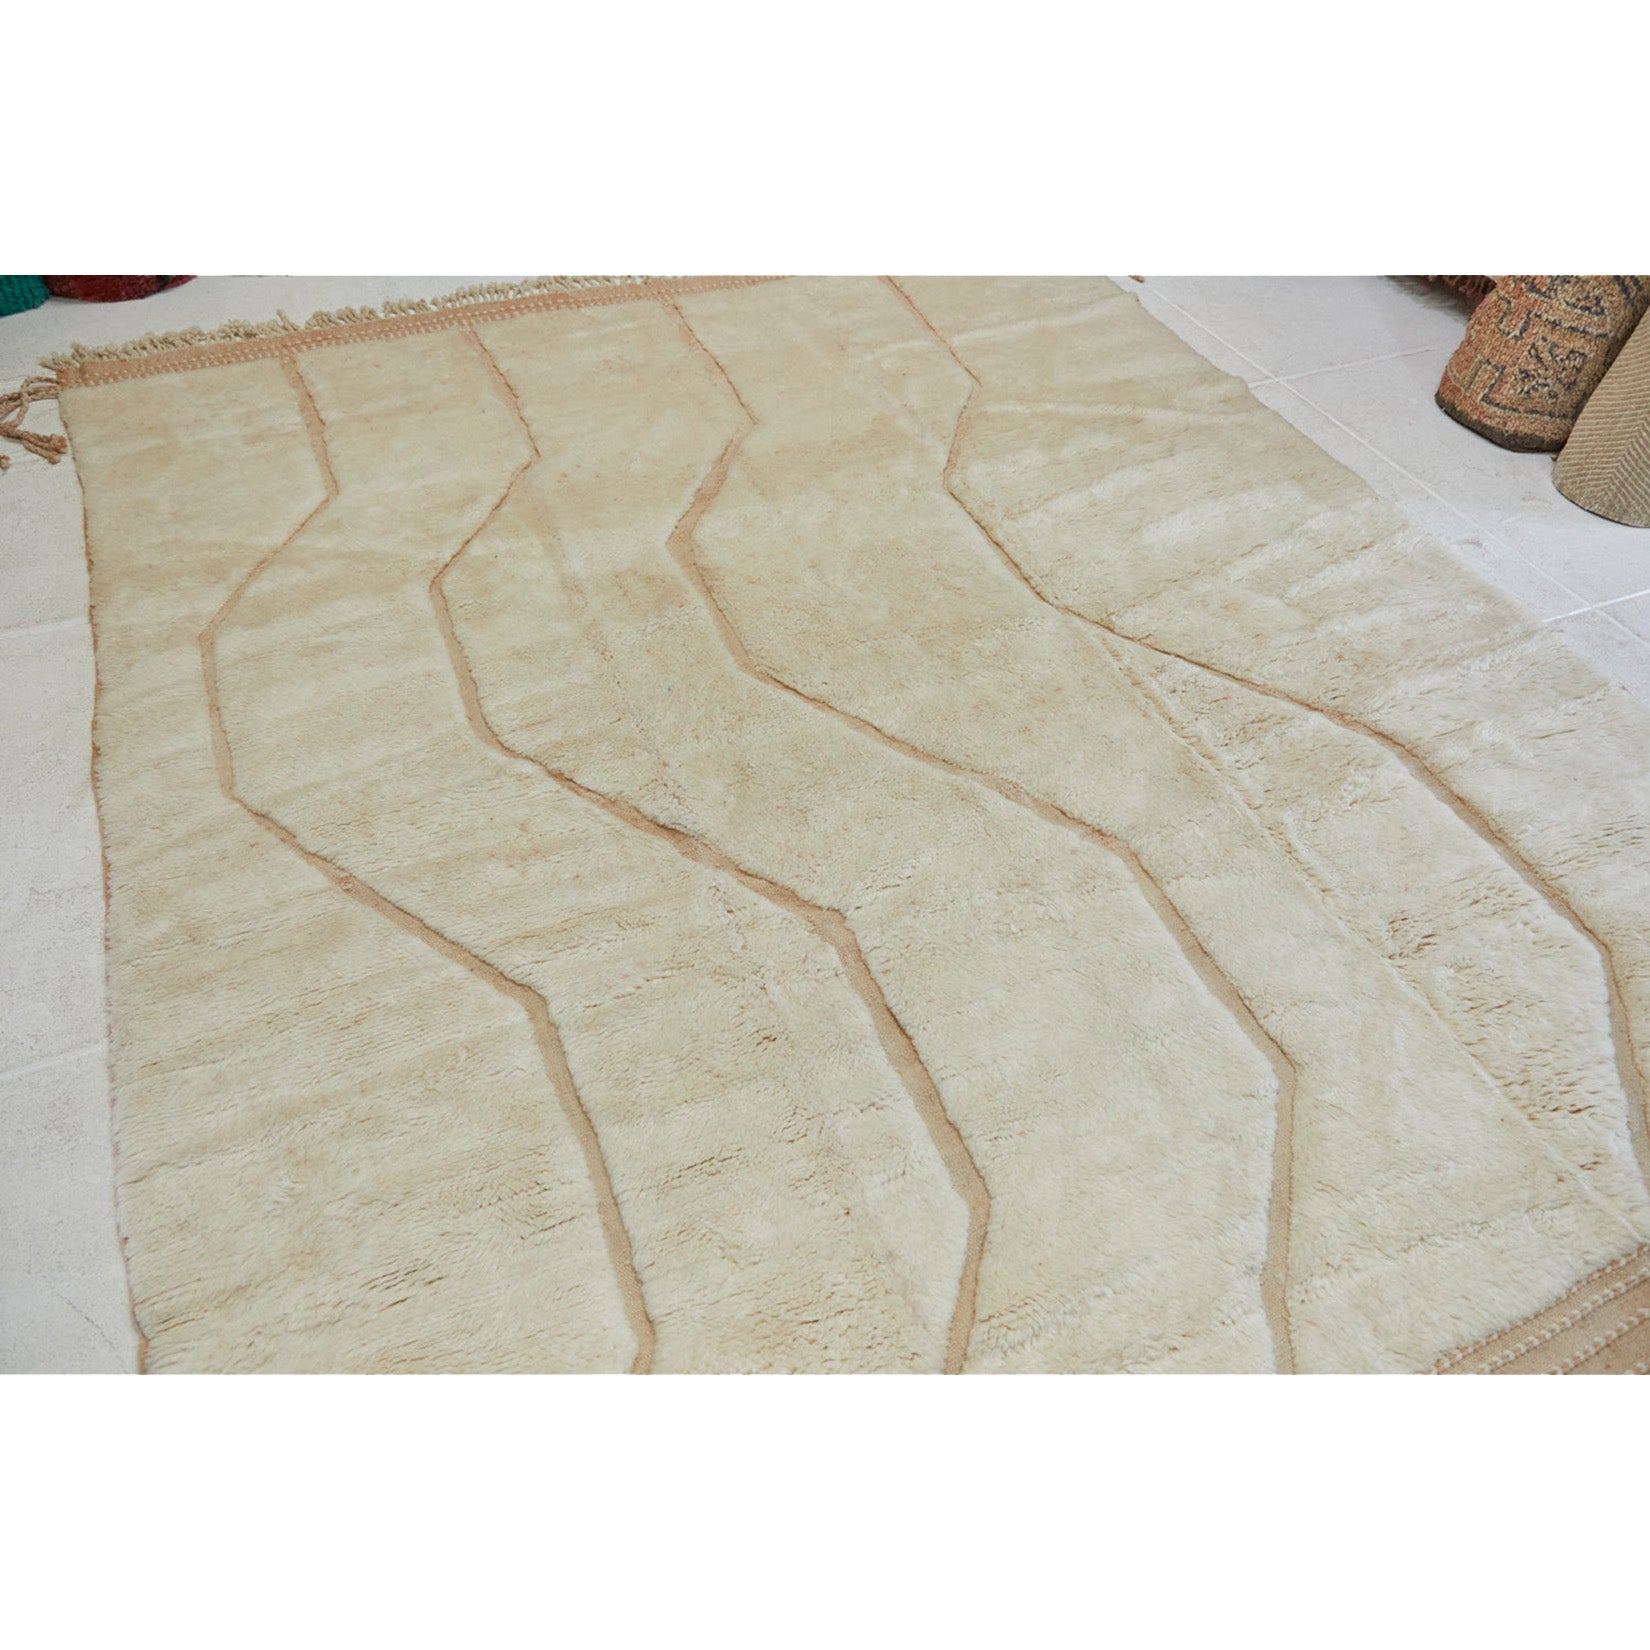 Full Beni Mrirt neutral rug with line details that are inset into the rug in dusty pink and peach tones